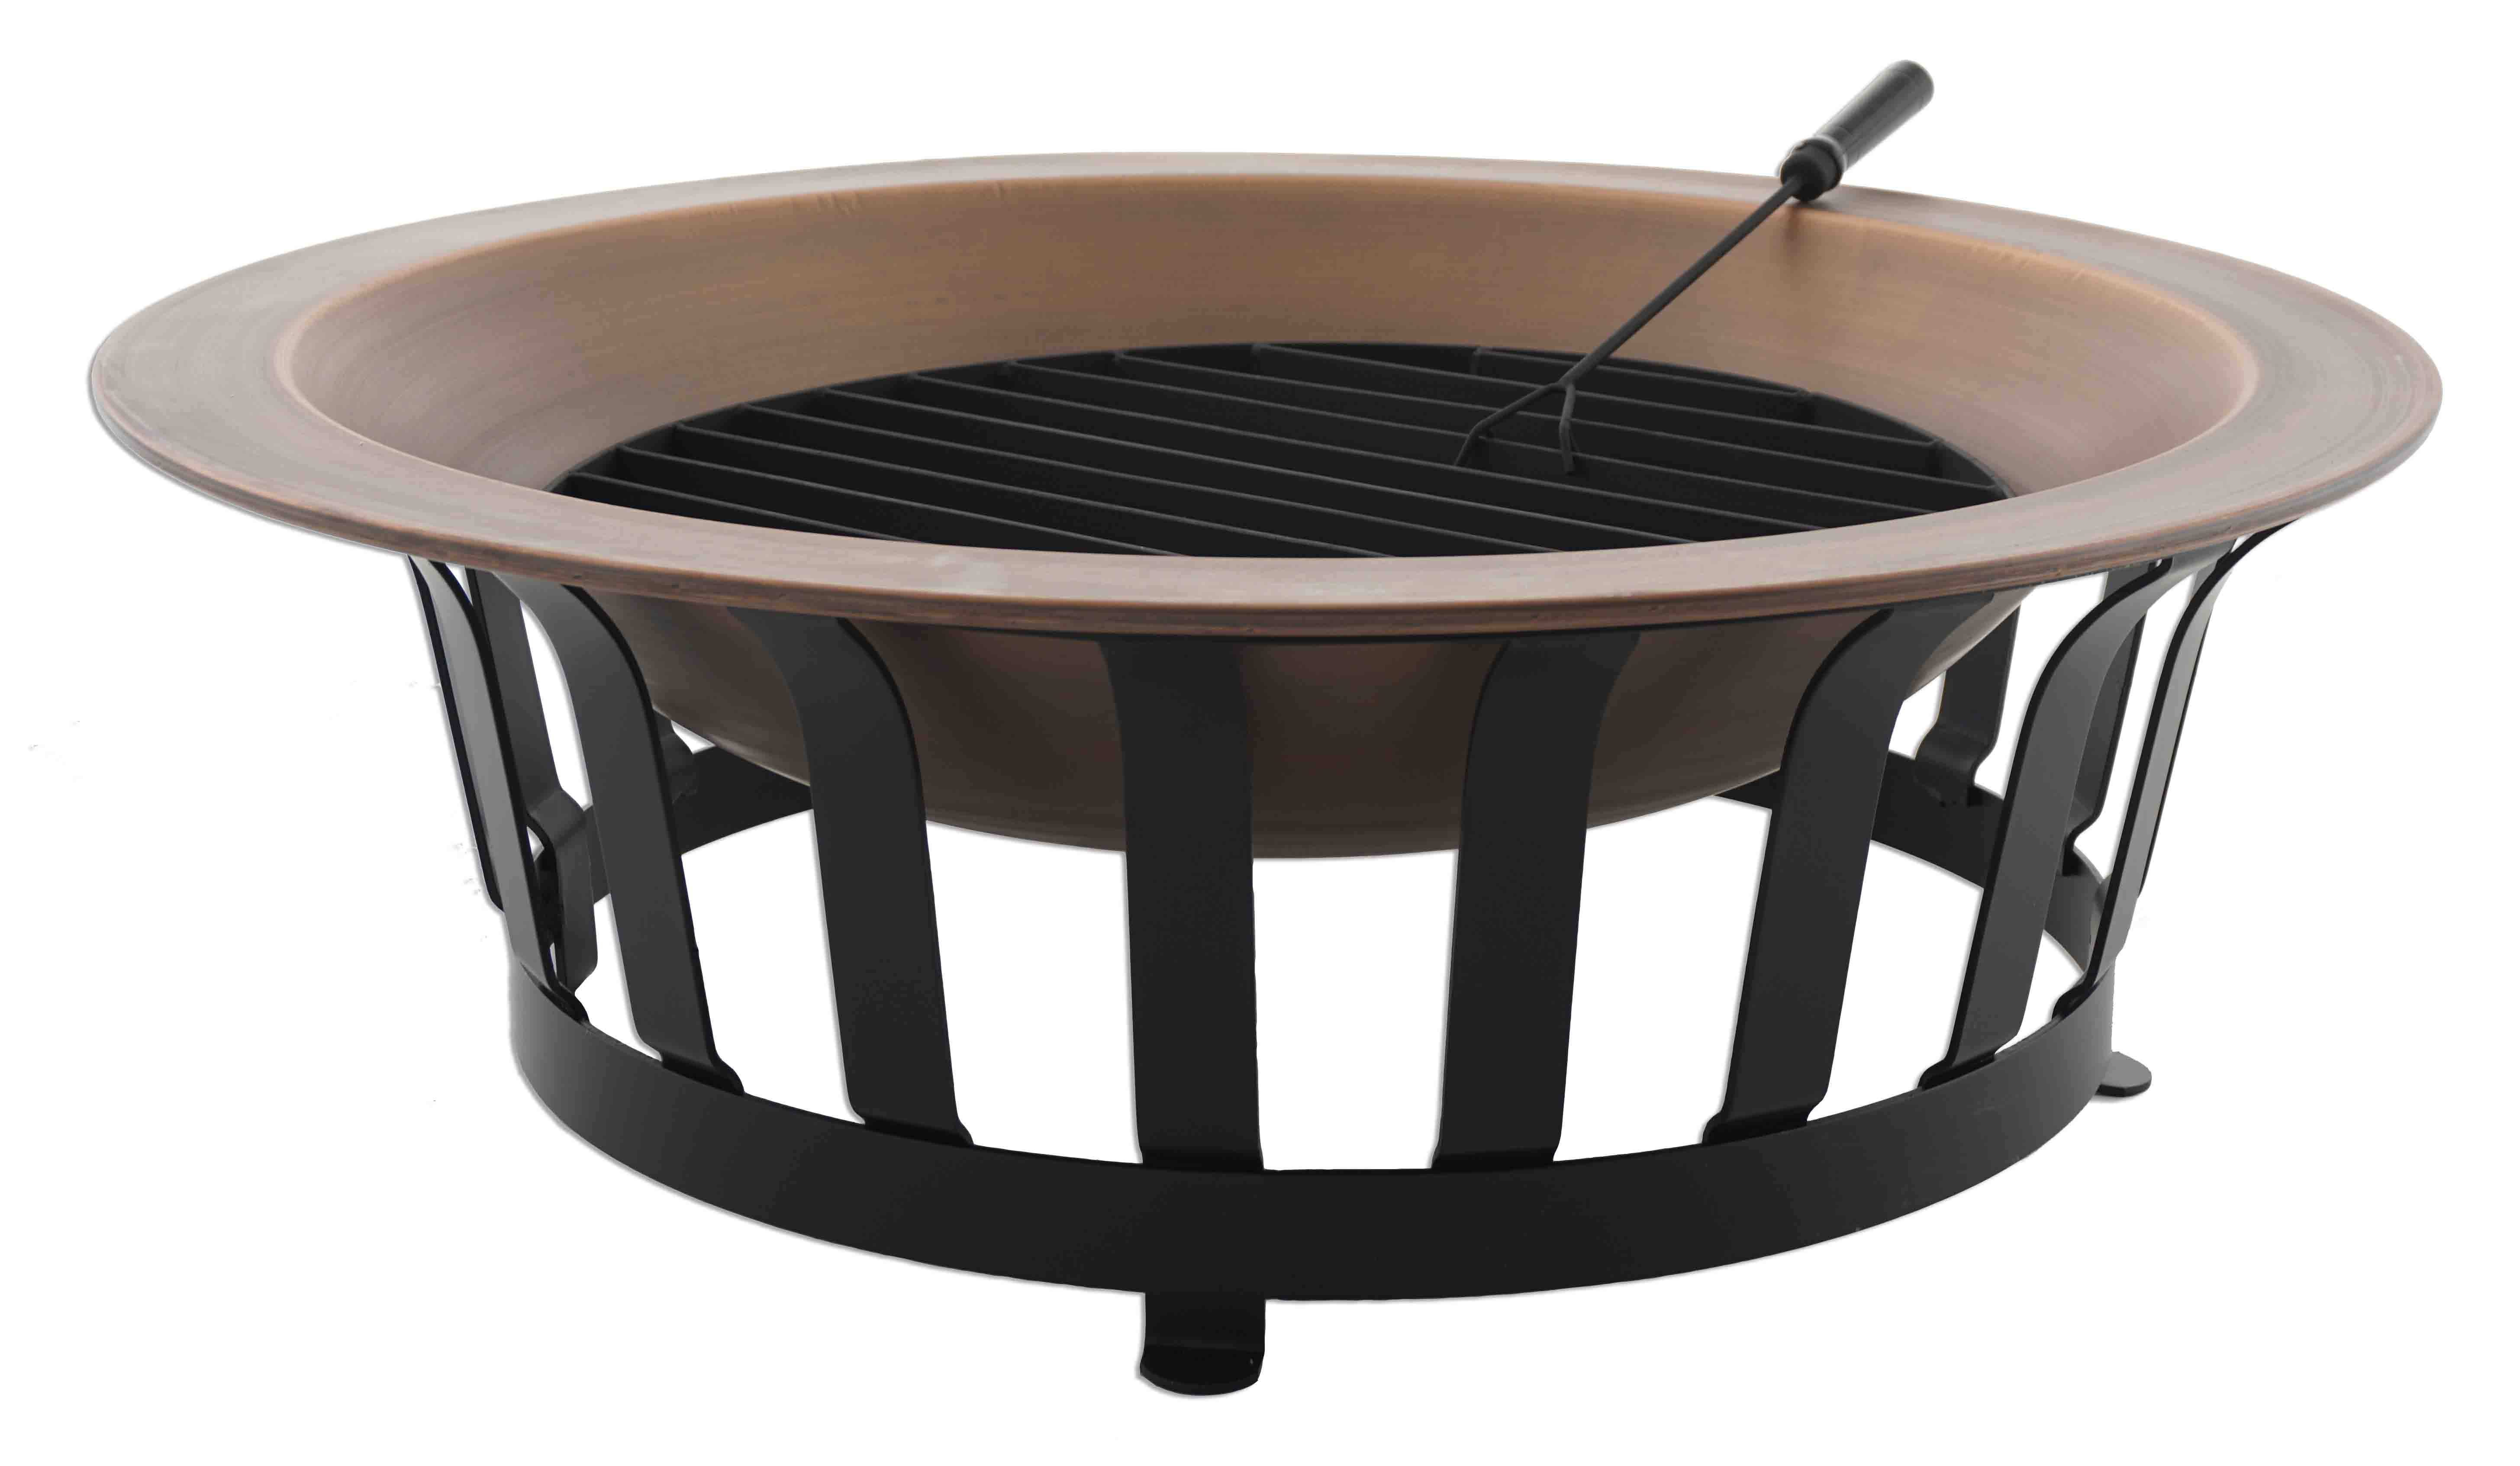 Copper Fire Pit Outdoor Fire Bowl Wood Burning Fire Ring For Patio pertaining to measurements 5822 X 3387